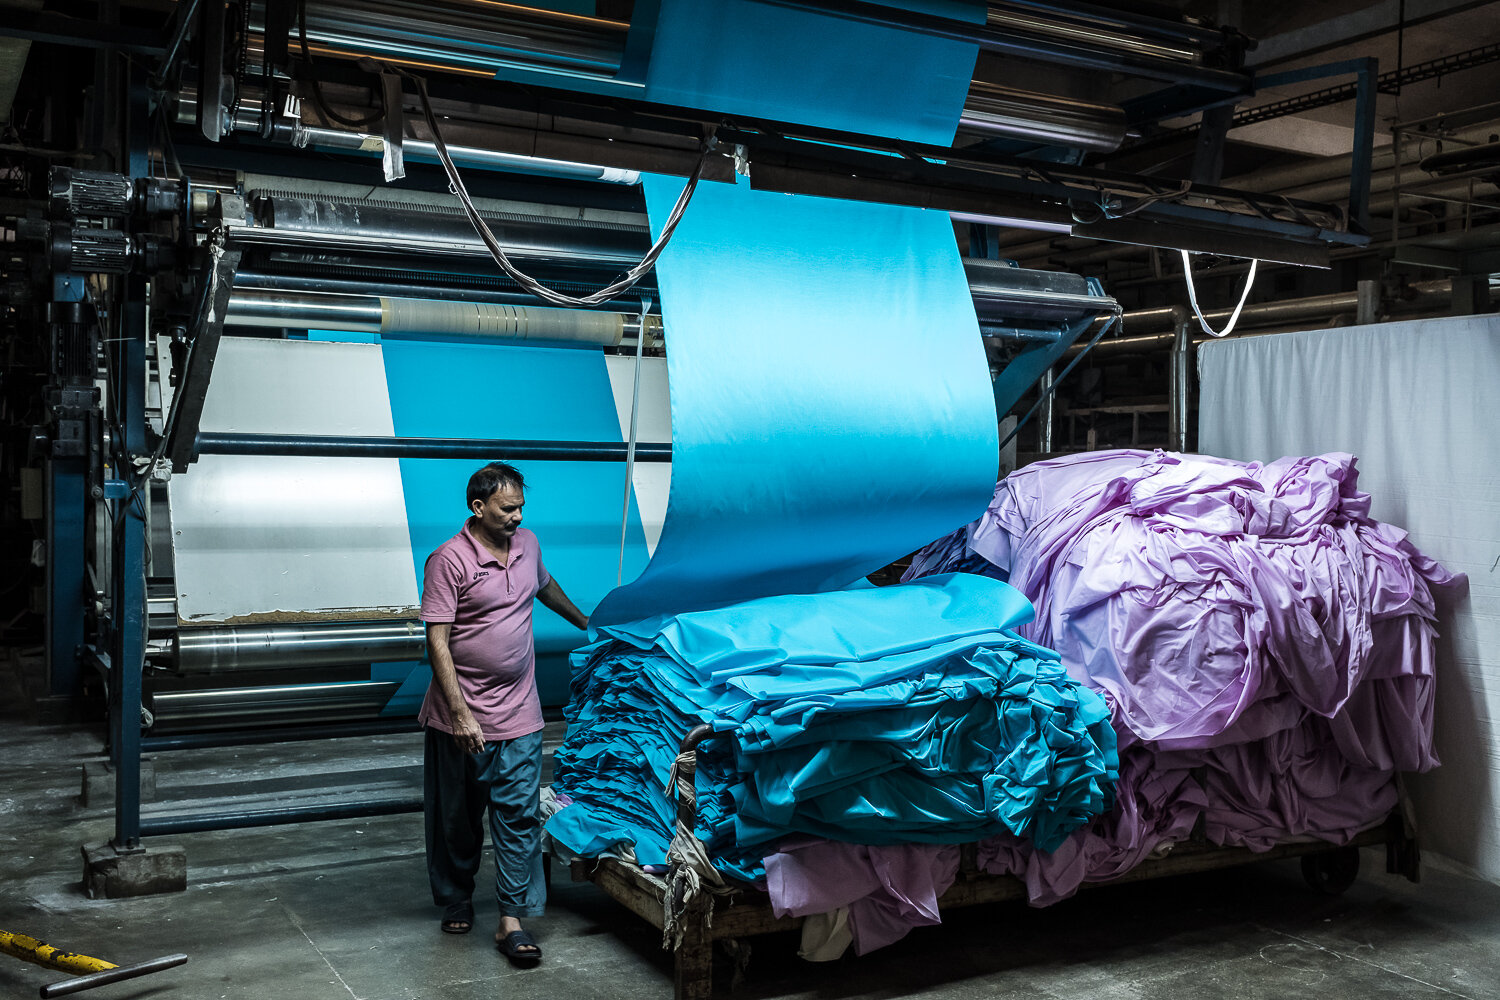  A worker tends to a fabric dyeing machine at MK Sons, a textile factory, on Wednesday, November 22, 2017 near Khurianwala, Punjab, Pakistan. 